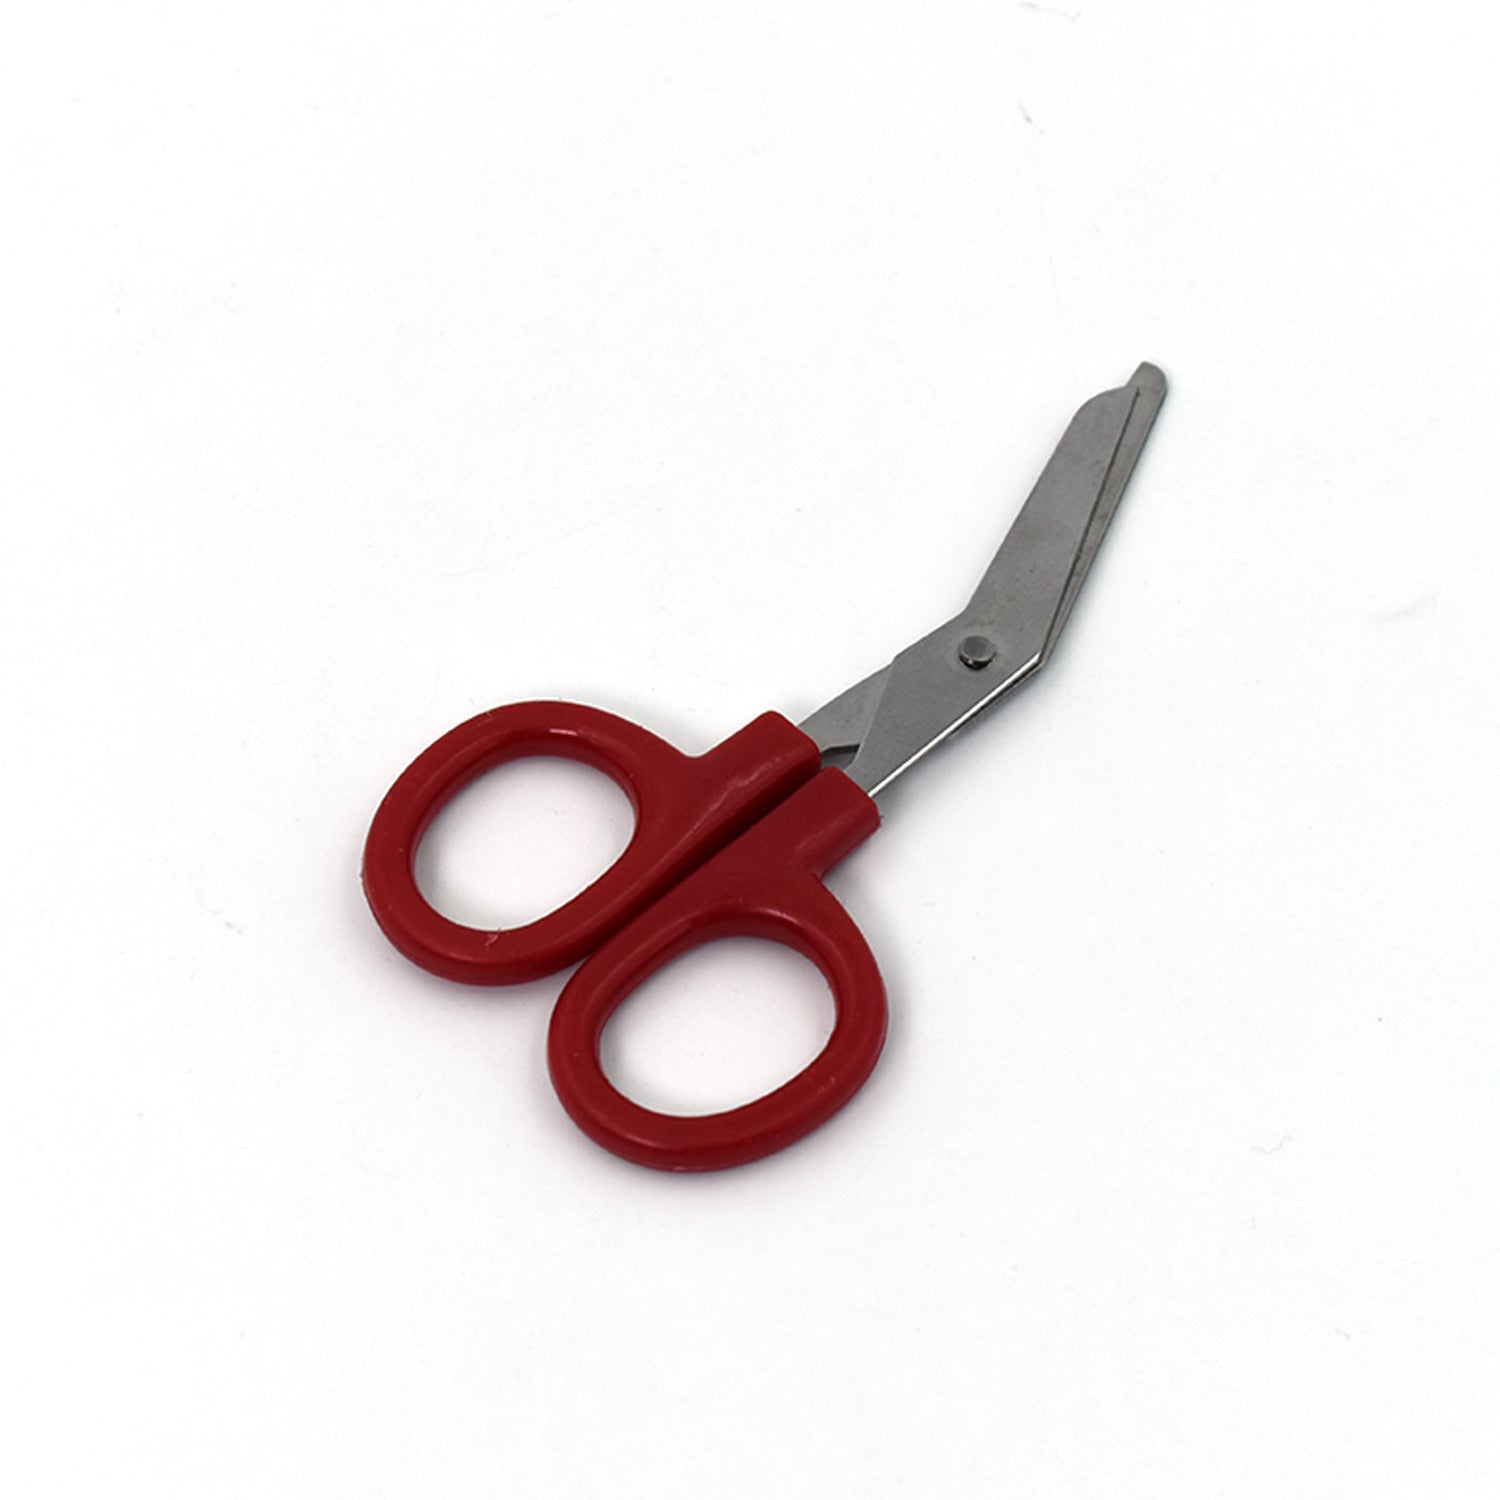 7624 cn Scissor For Cutting And Designing Purposes By Students And All Etc. DeoDap